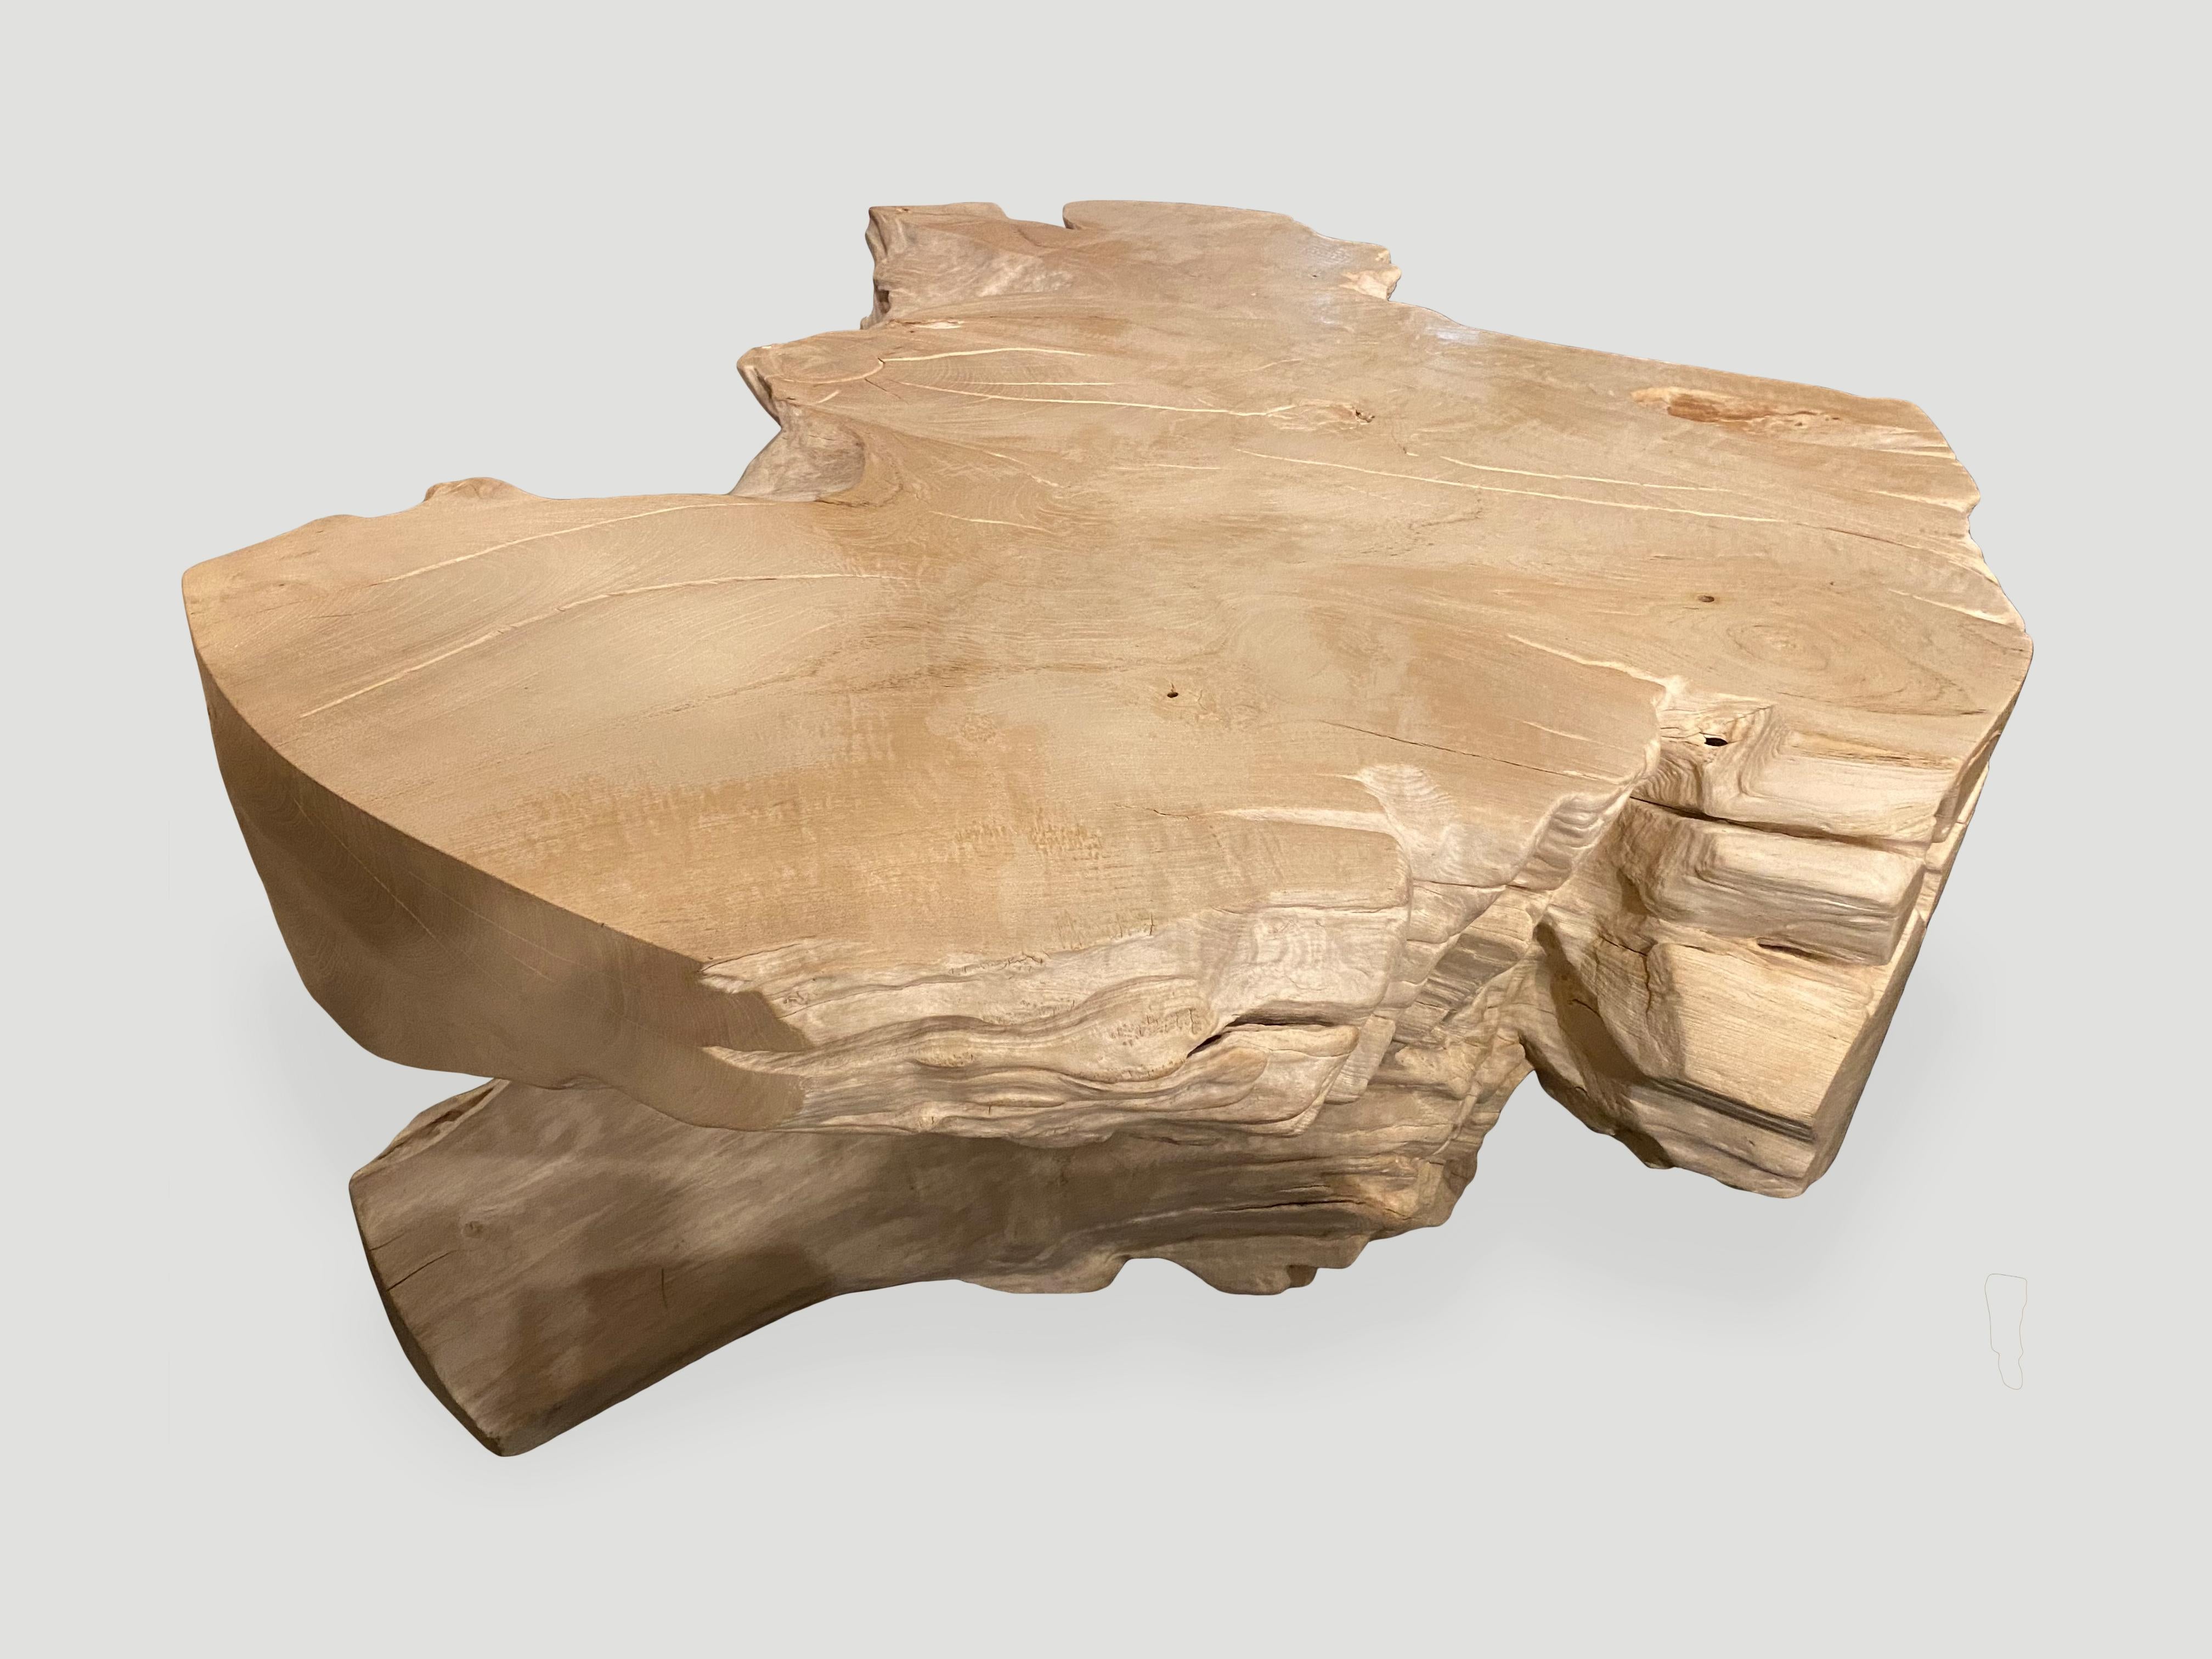 Beautiful organic teak root coffee table with stunning erosion detail. The reclaimed teak is bleached and left to bake in the sun and sea salt air for over a year to achieve this unique finish. We have added a light shellack to the top and flat side